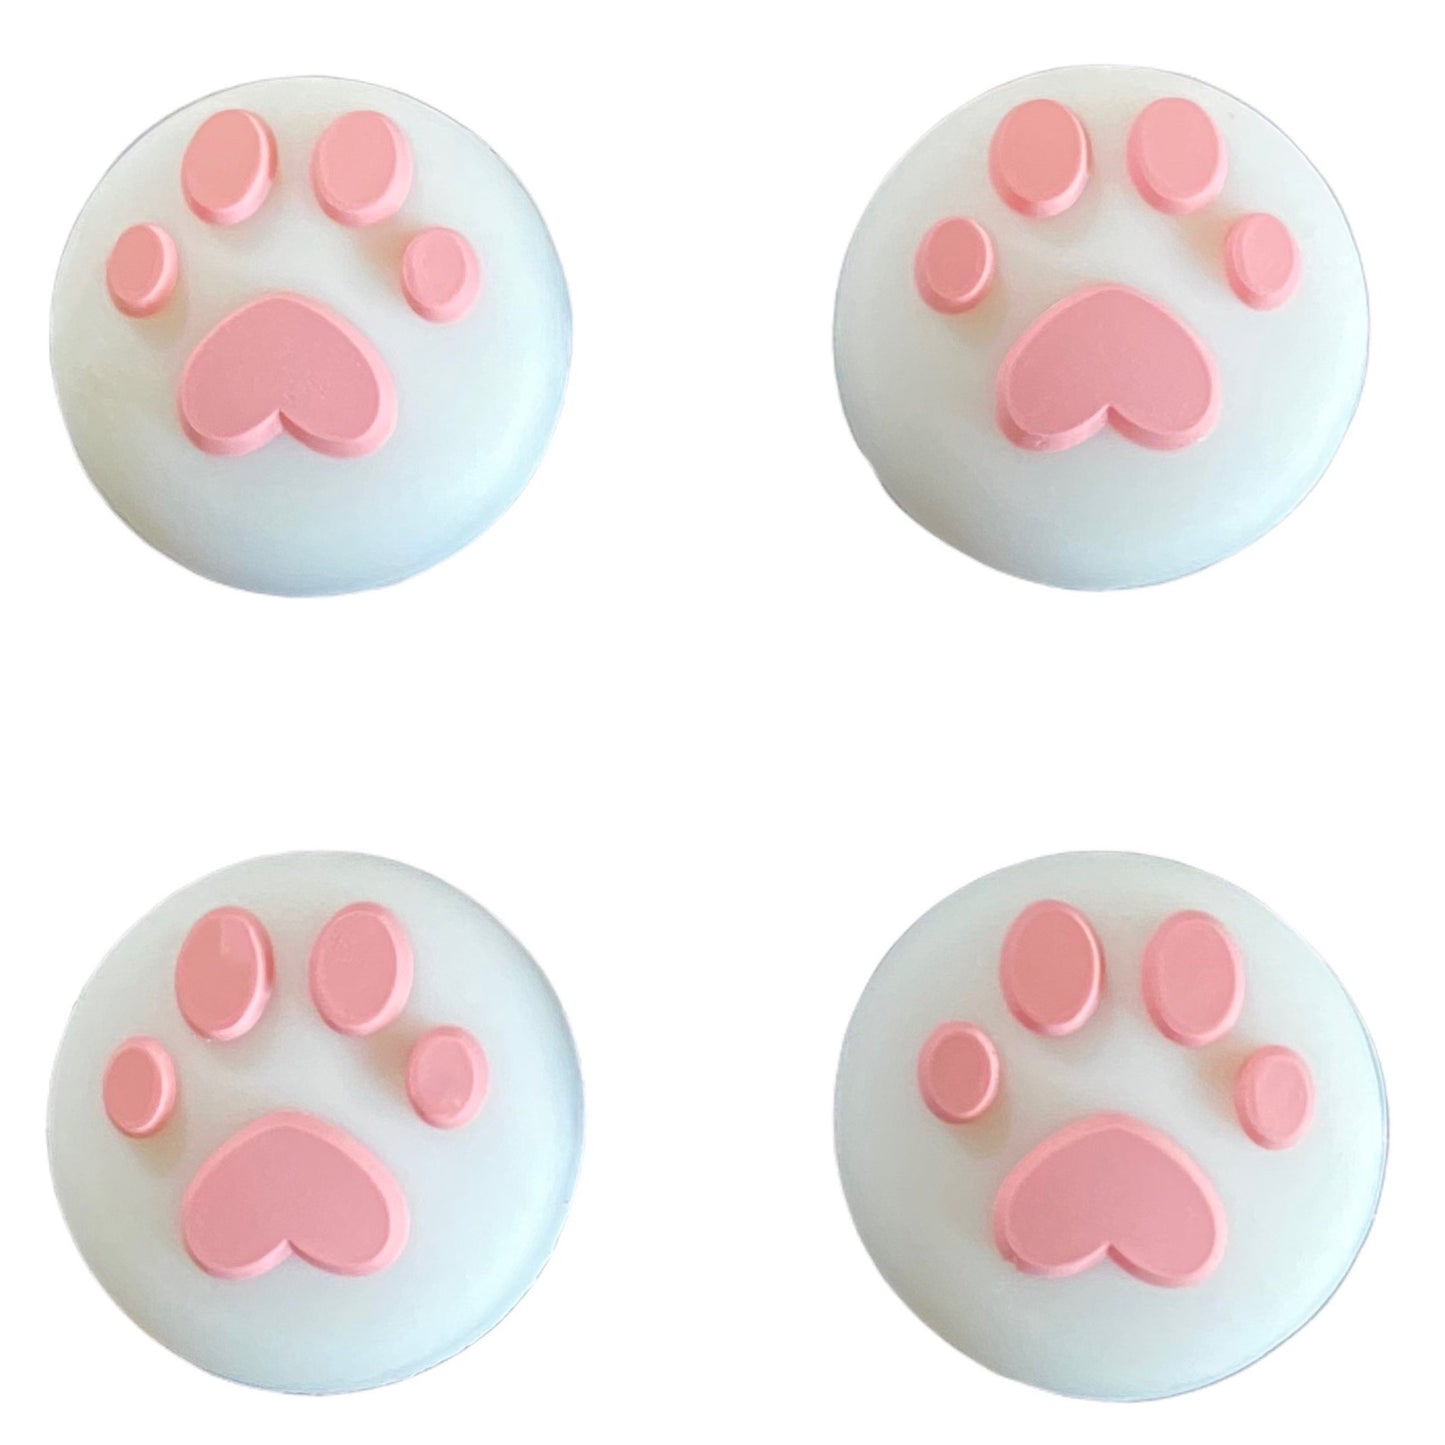 JenDore Pink & White 4Pcs Paws Silicone Thumb Grip Caps for Nintendo Switch